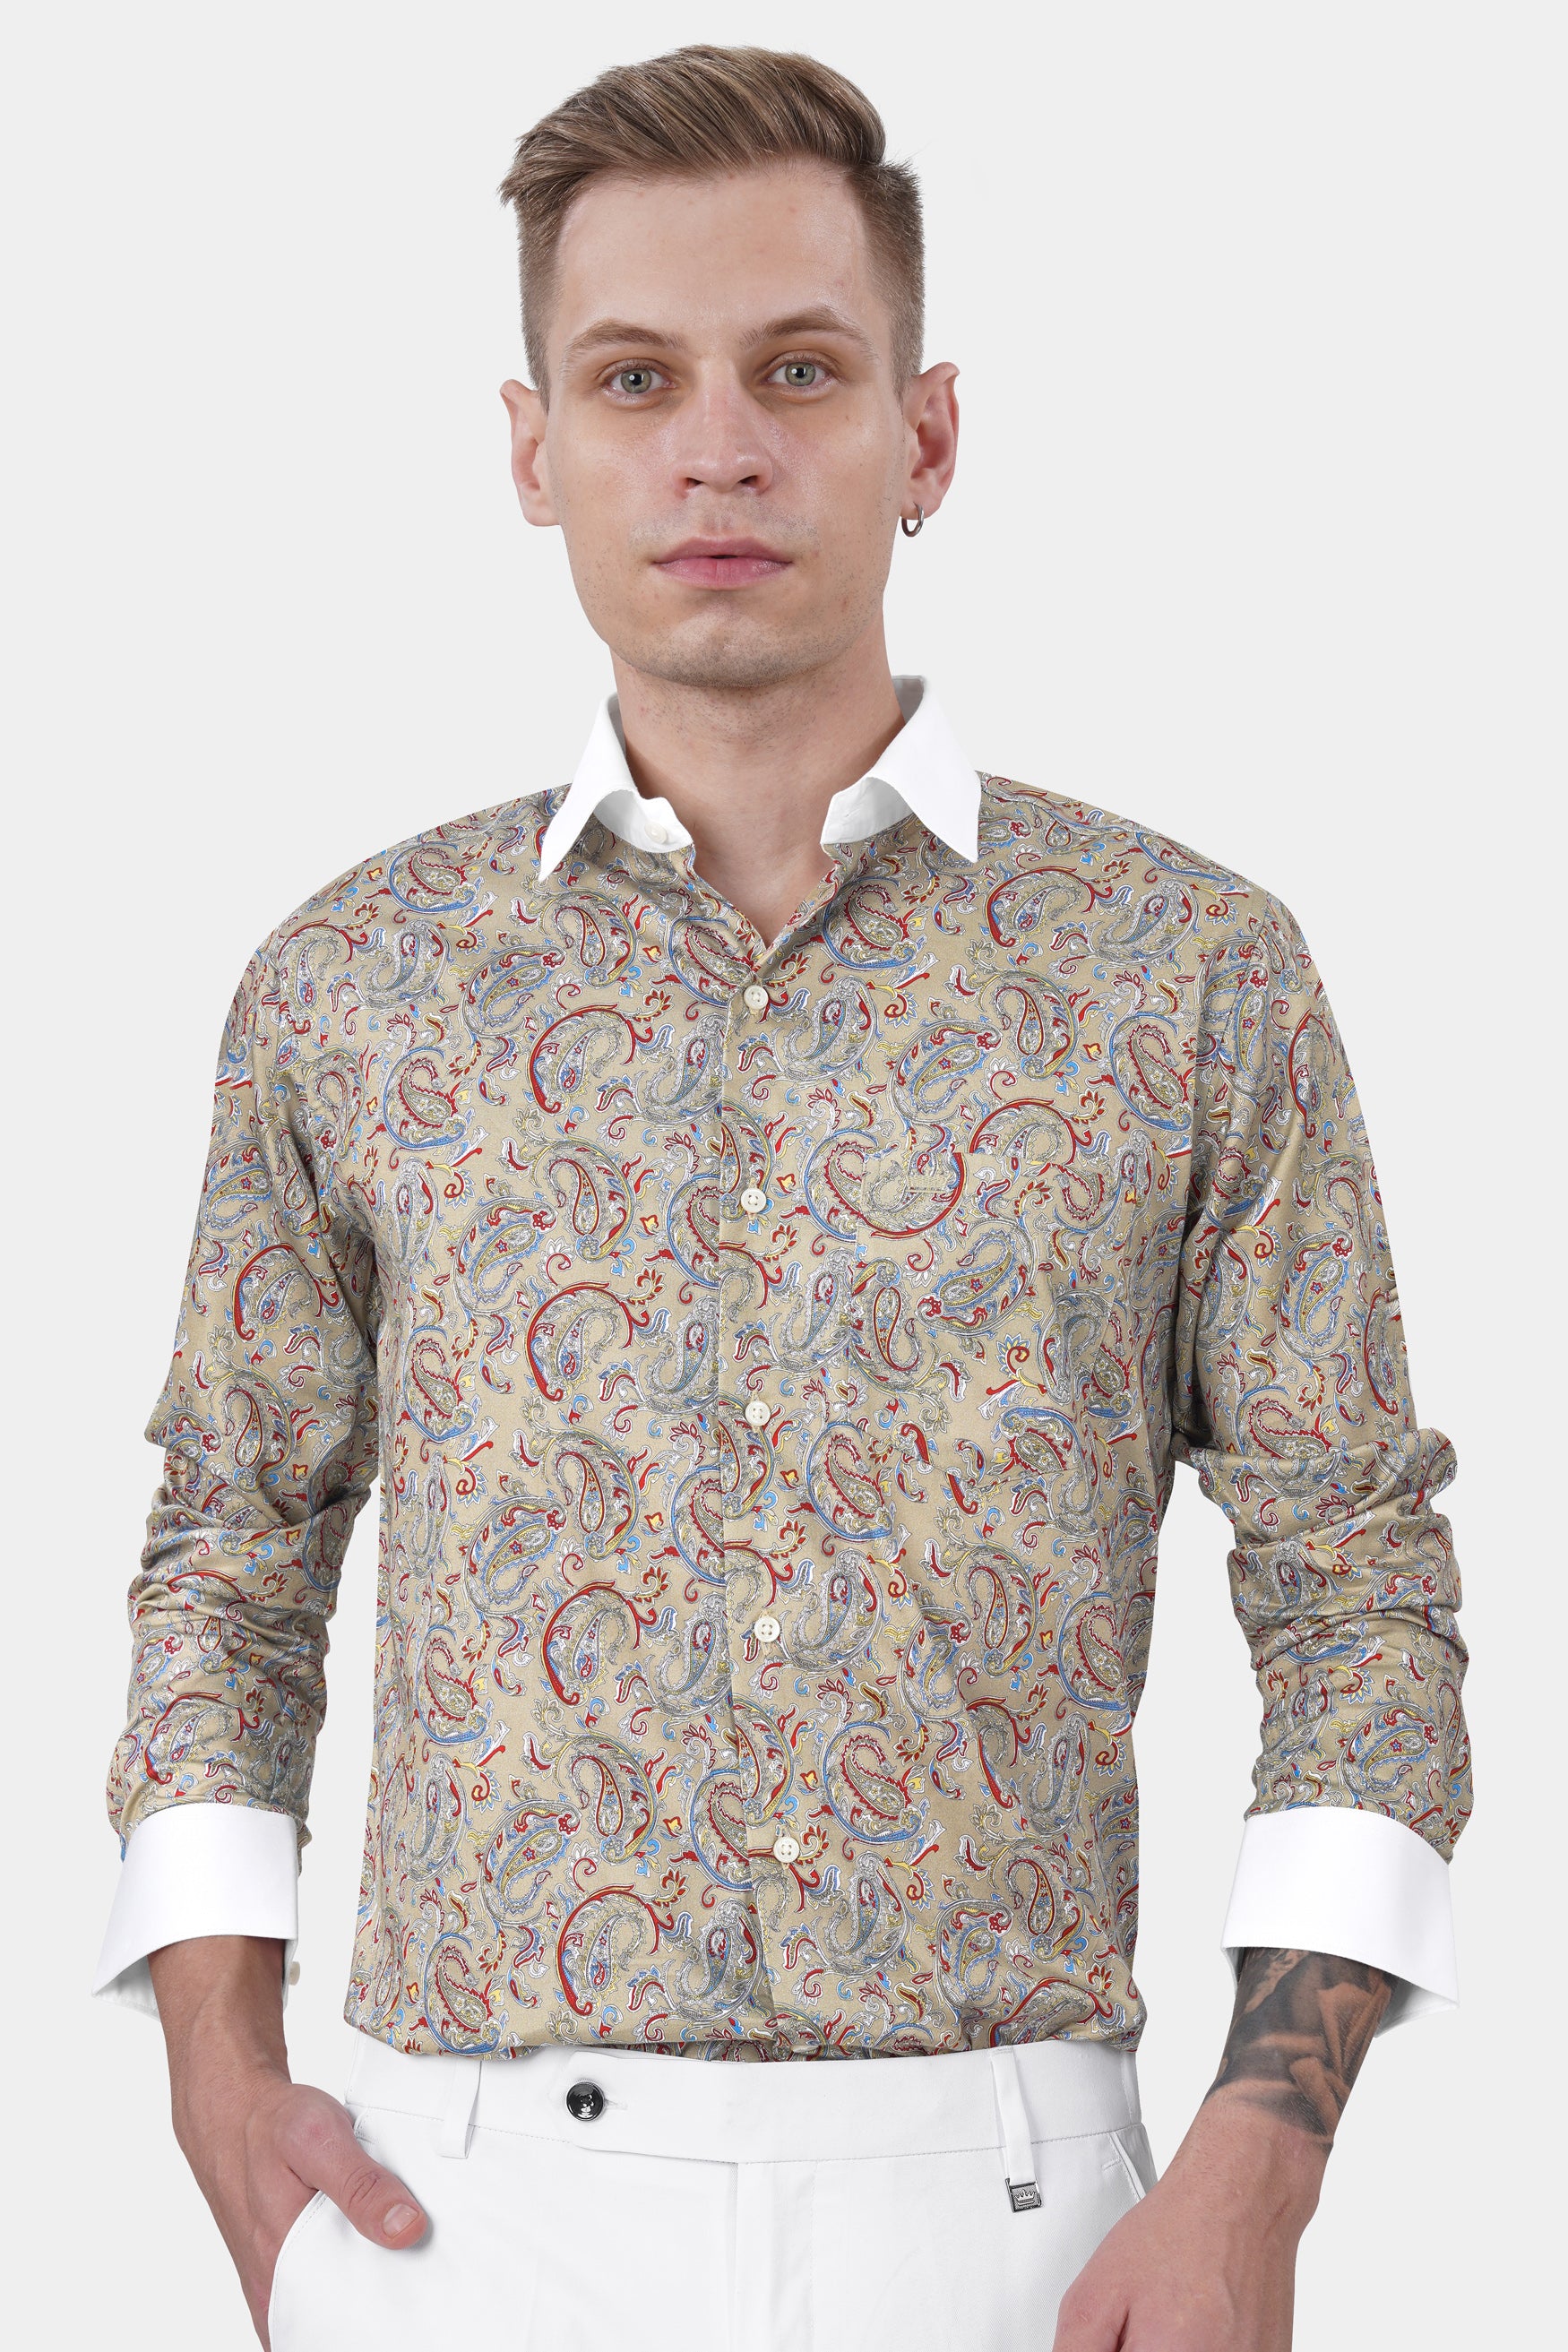 Pavlova Brown and Stiletto Red Multicolour Paisley Printed with White Cuffs and Collar Subtle Sheen Super Soft Premium Cotton Shirt 11736-WCC-38, 11736-WCC-H-38, 11736-WCC-39, 11736-WCC-H-39, 11736-WCC-40, 11736-WCC-H-40, 11736-WCC-42, 11736-WCC-H-42, 11736-WCC-44, 11736-WCC-H-44, 11736-WCC-46, 11736-WCC-H-46, 11736-WCC-48, 11736-WCC-H-48, 11736-WCC-50, 11736-WCC-H-50, 11736-WCC-52, 11736-WCC-H-52